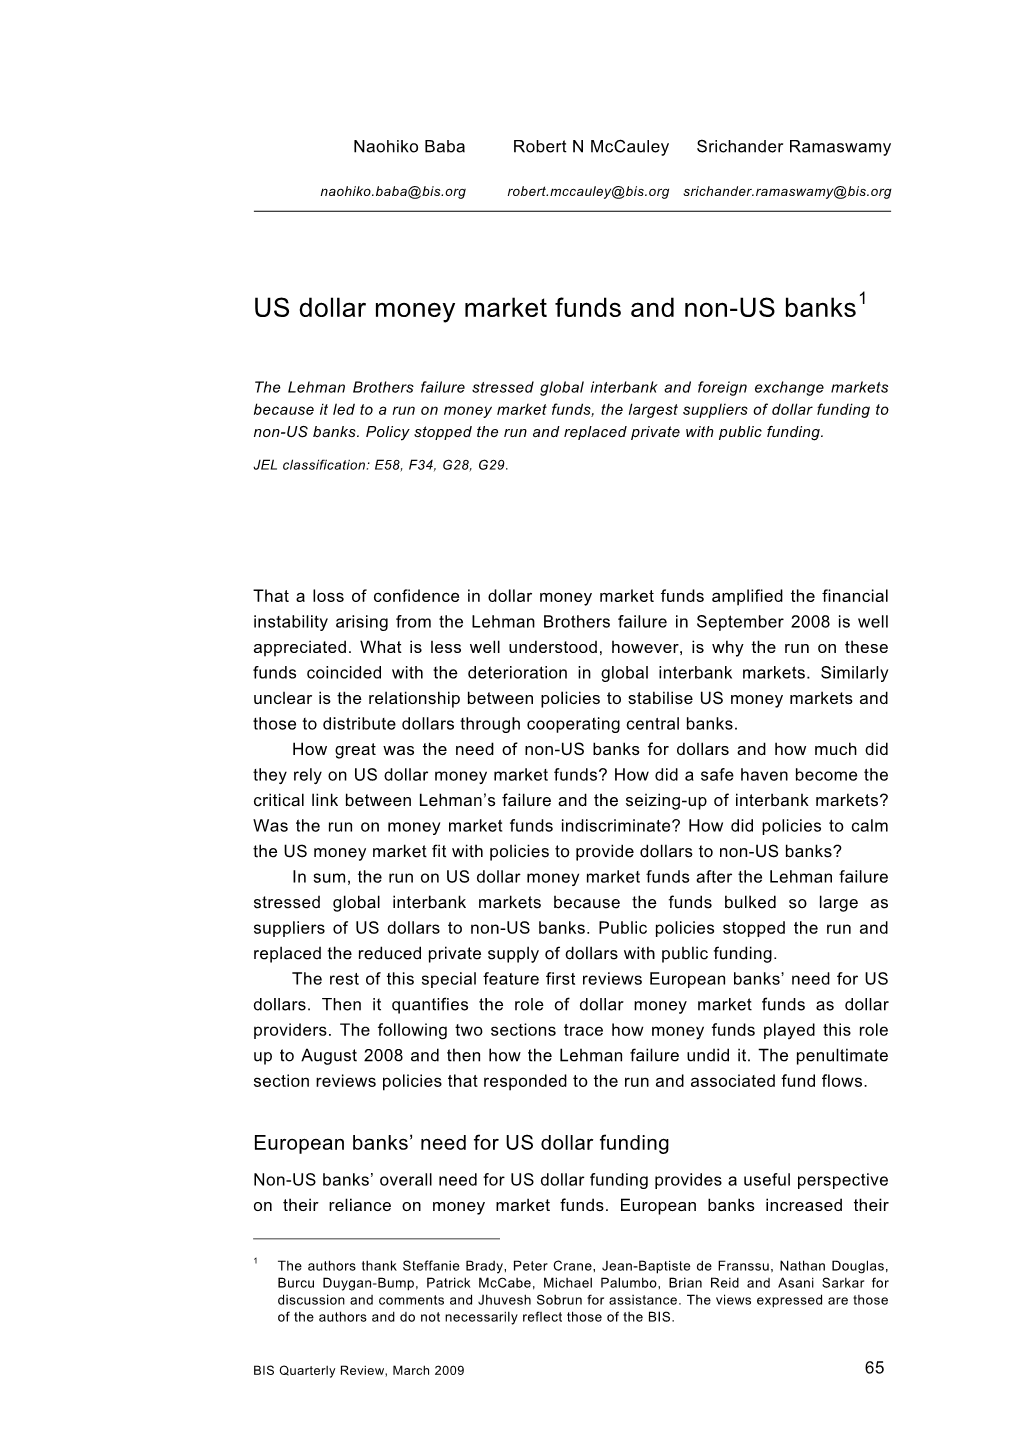 US Dollar Money Market Funds and Non-US Banks1